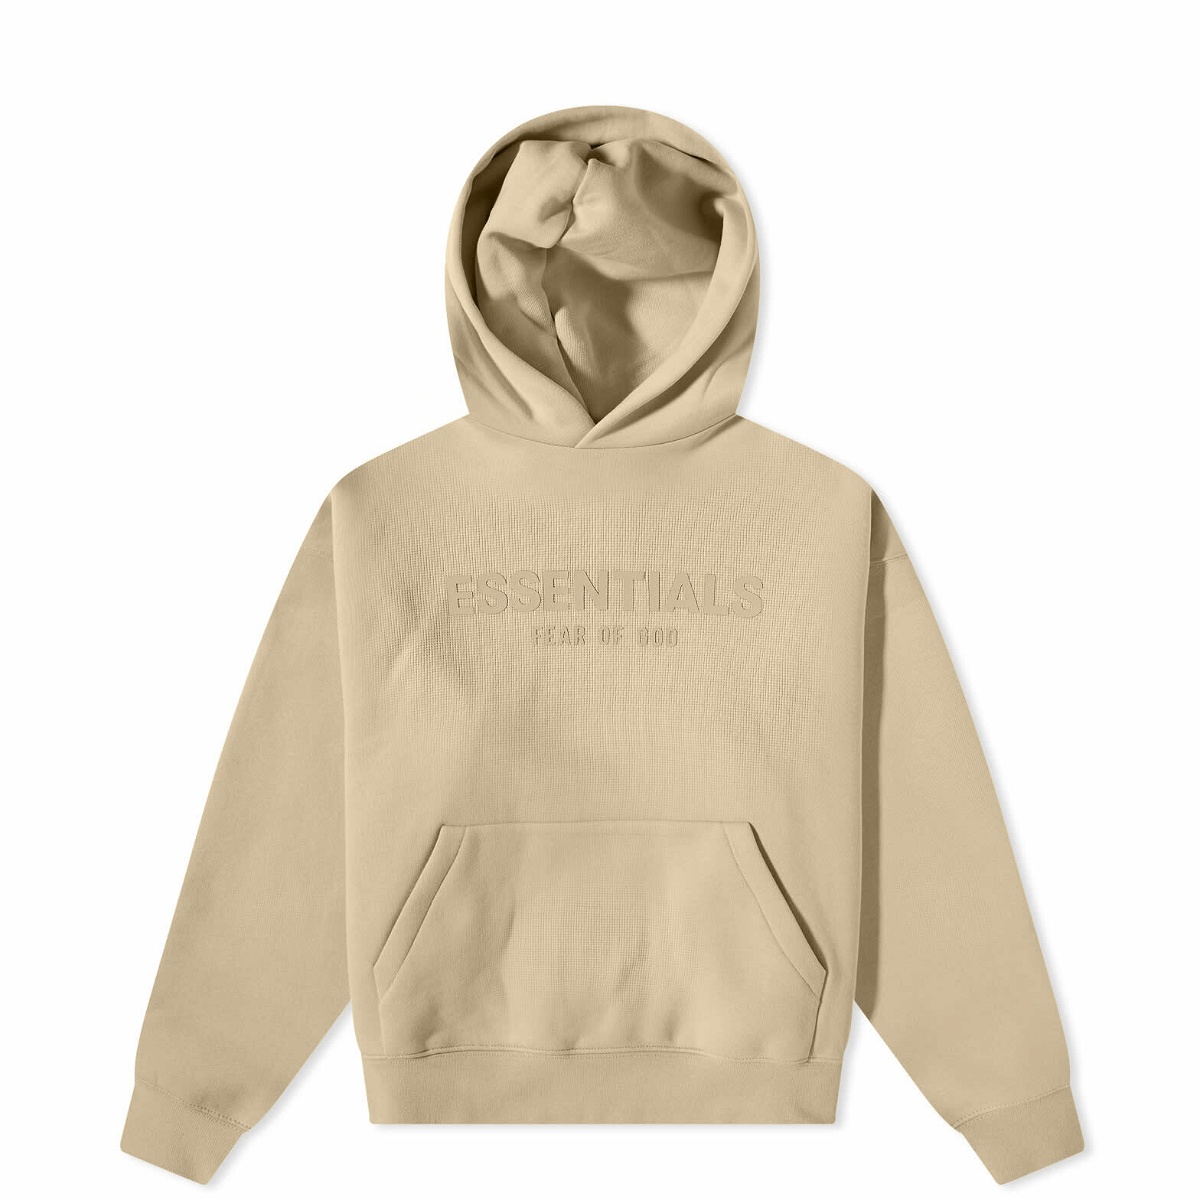 Fear of God ESSENTIALS Kids Popover Hoody in Sand Fear Of God Essentials